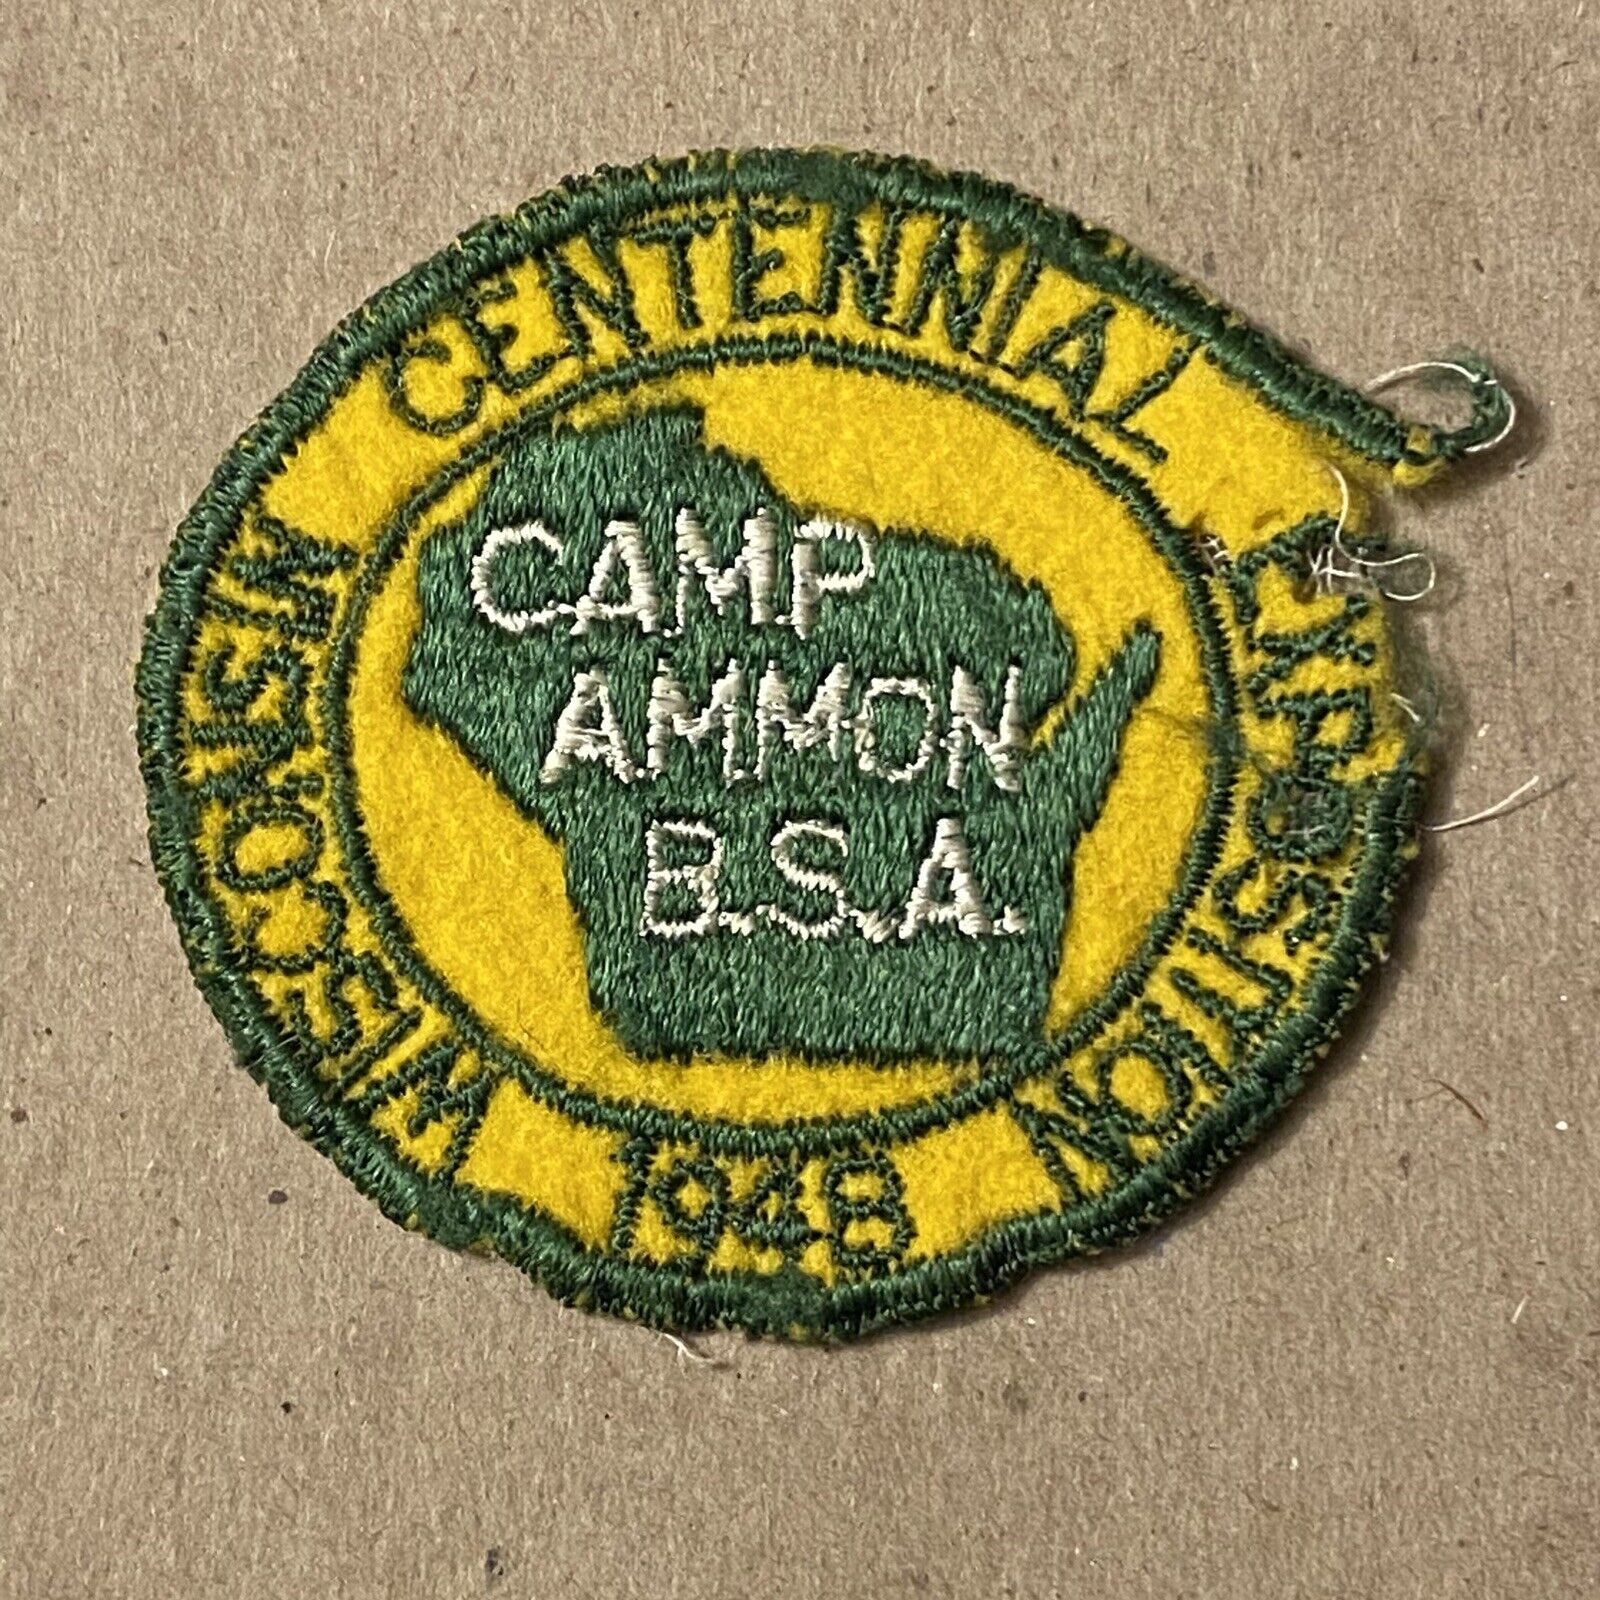 Vintage Boy Scouts 1948 Camp Ammon Wisconsin Centennial Exposition Patch BSA